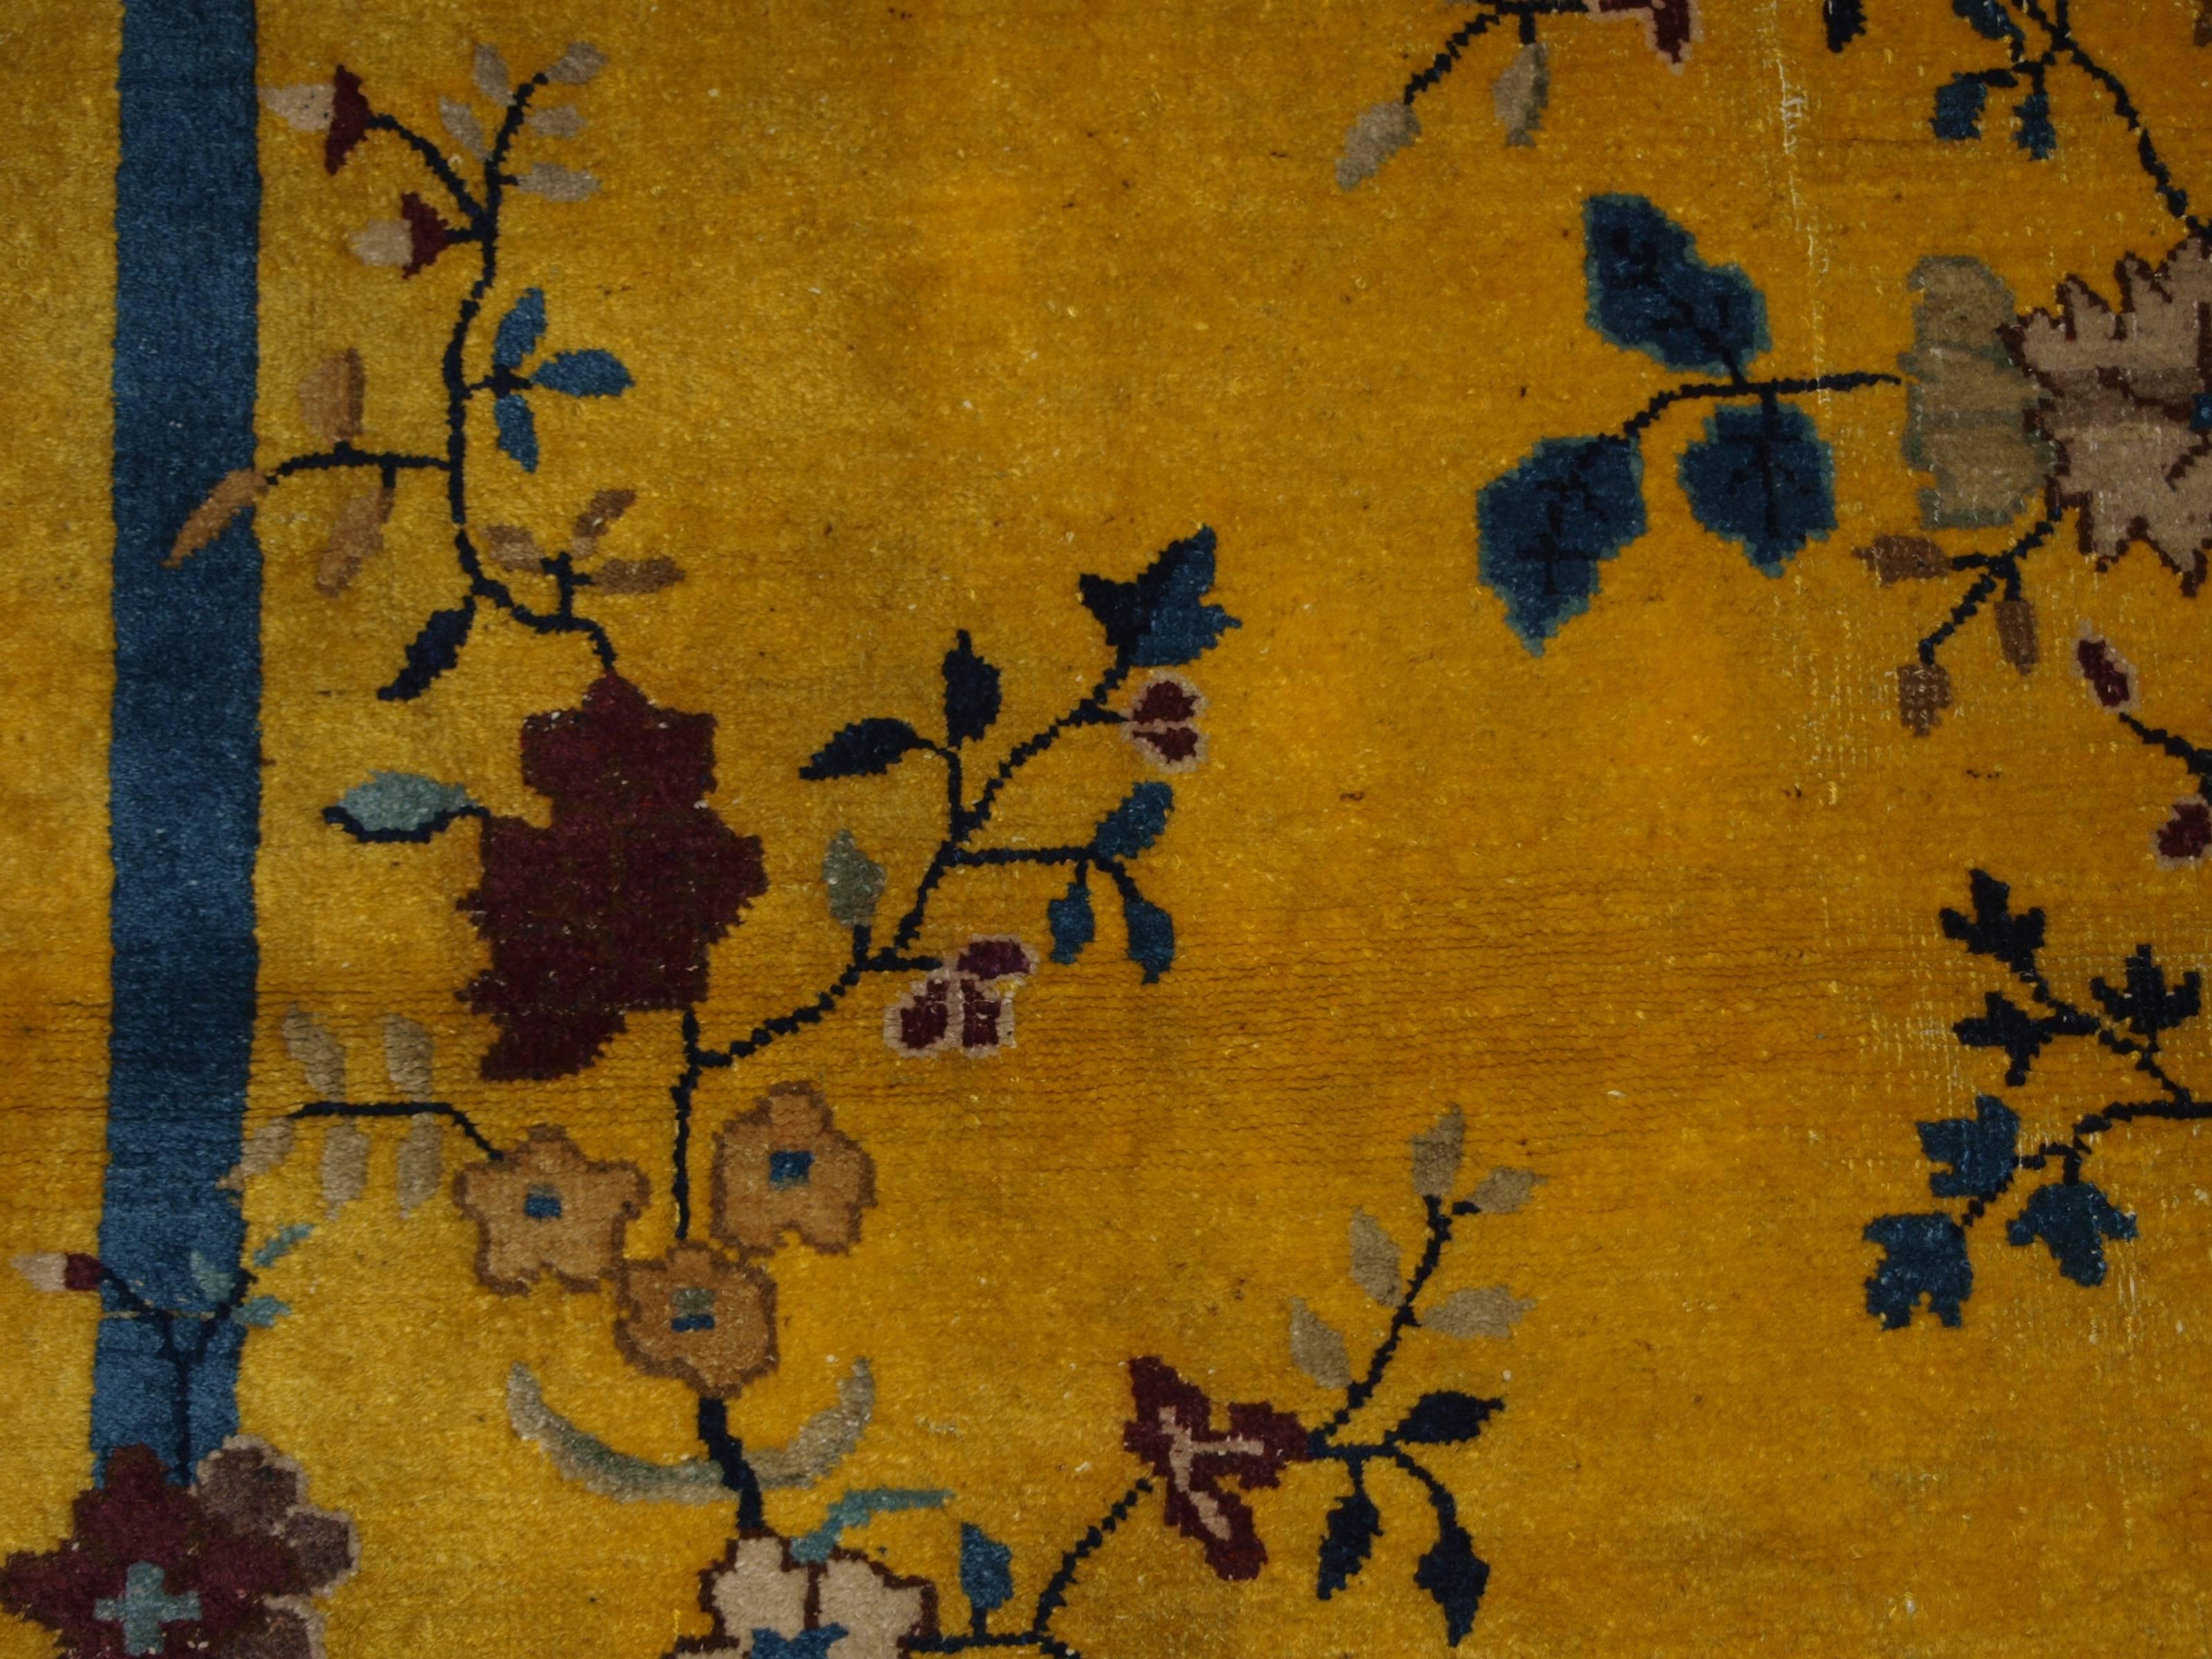 Size: 5ft 9in x 4ft 1in (175 x 125cm).

Antique Chinese yellow ground peking rug, 

circa 1900.

A striking rug with the Classic Chinese garden design with trees in full blossom. 

The rug is in good condition with even wear and good pile.